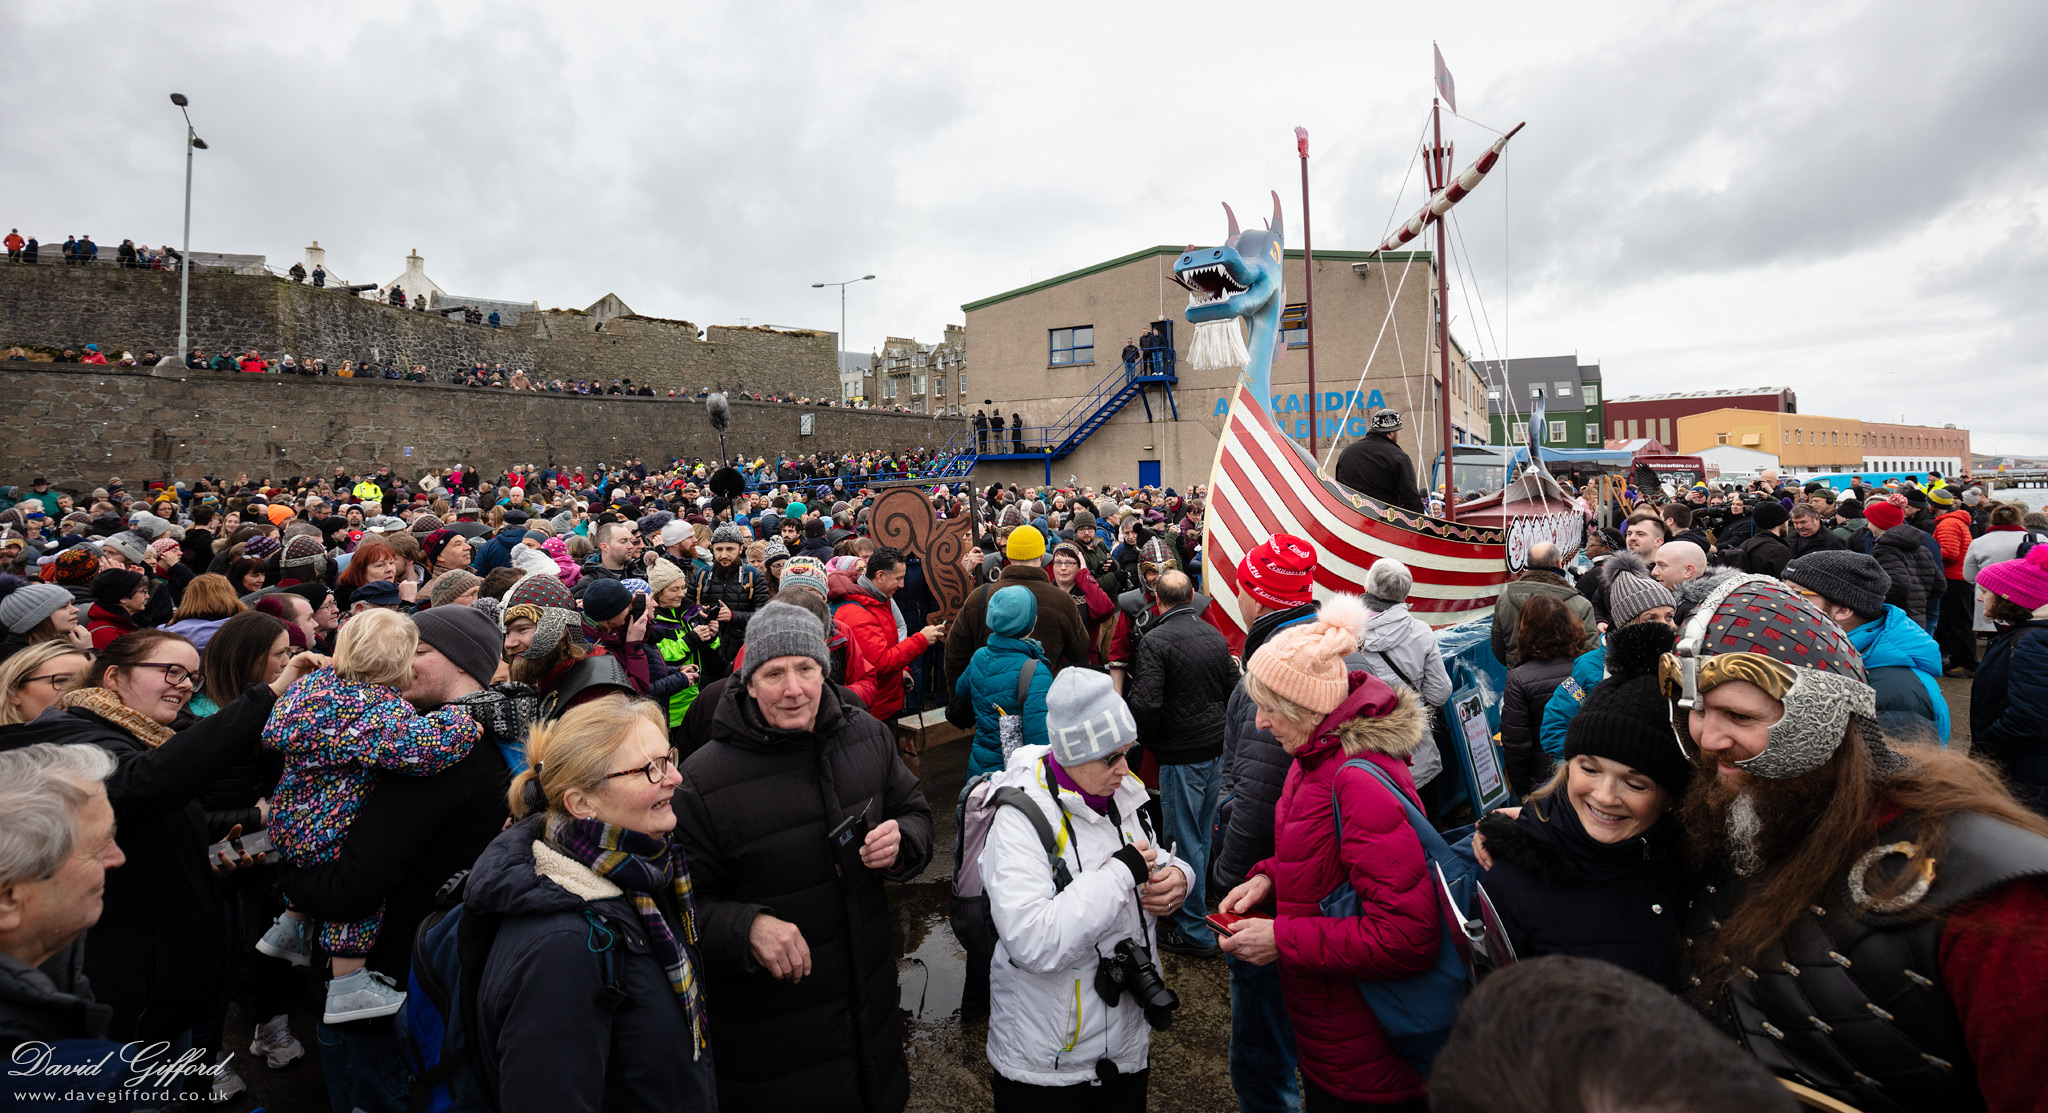 Up Helly Aa 2020: Morning Crowds